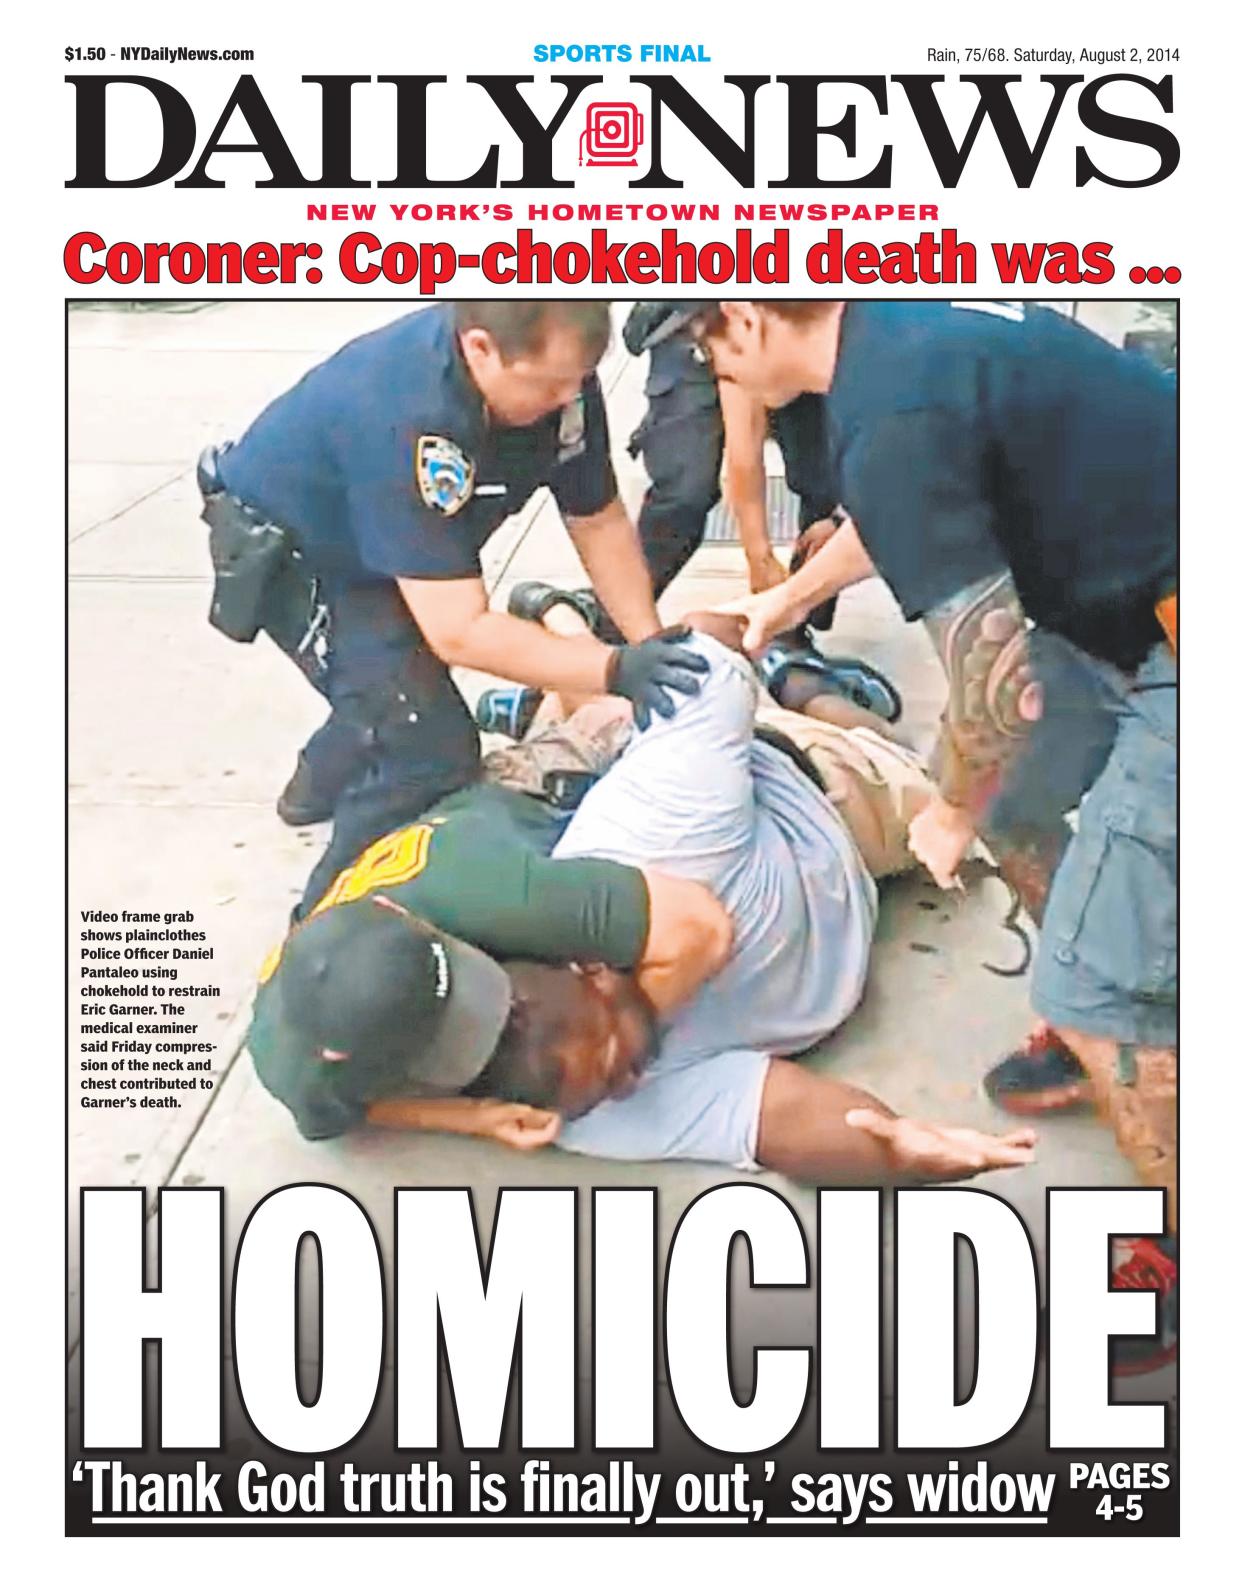 Daily News front page August 2, 2014, Headline: HOMICIDE 'Thanks God truth is finally out,' says widow - Video frame grab shows plainclothes Police Officer Daniel Pantaleo using chokehold to restrain Eric Garner. The medical examiner said Friday compression of the neck and check contributed to Garner's death. 